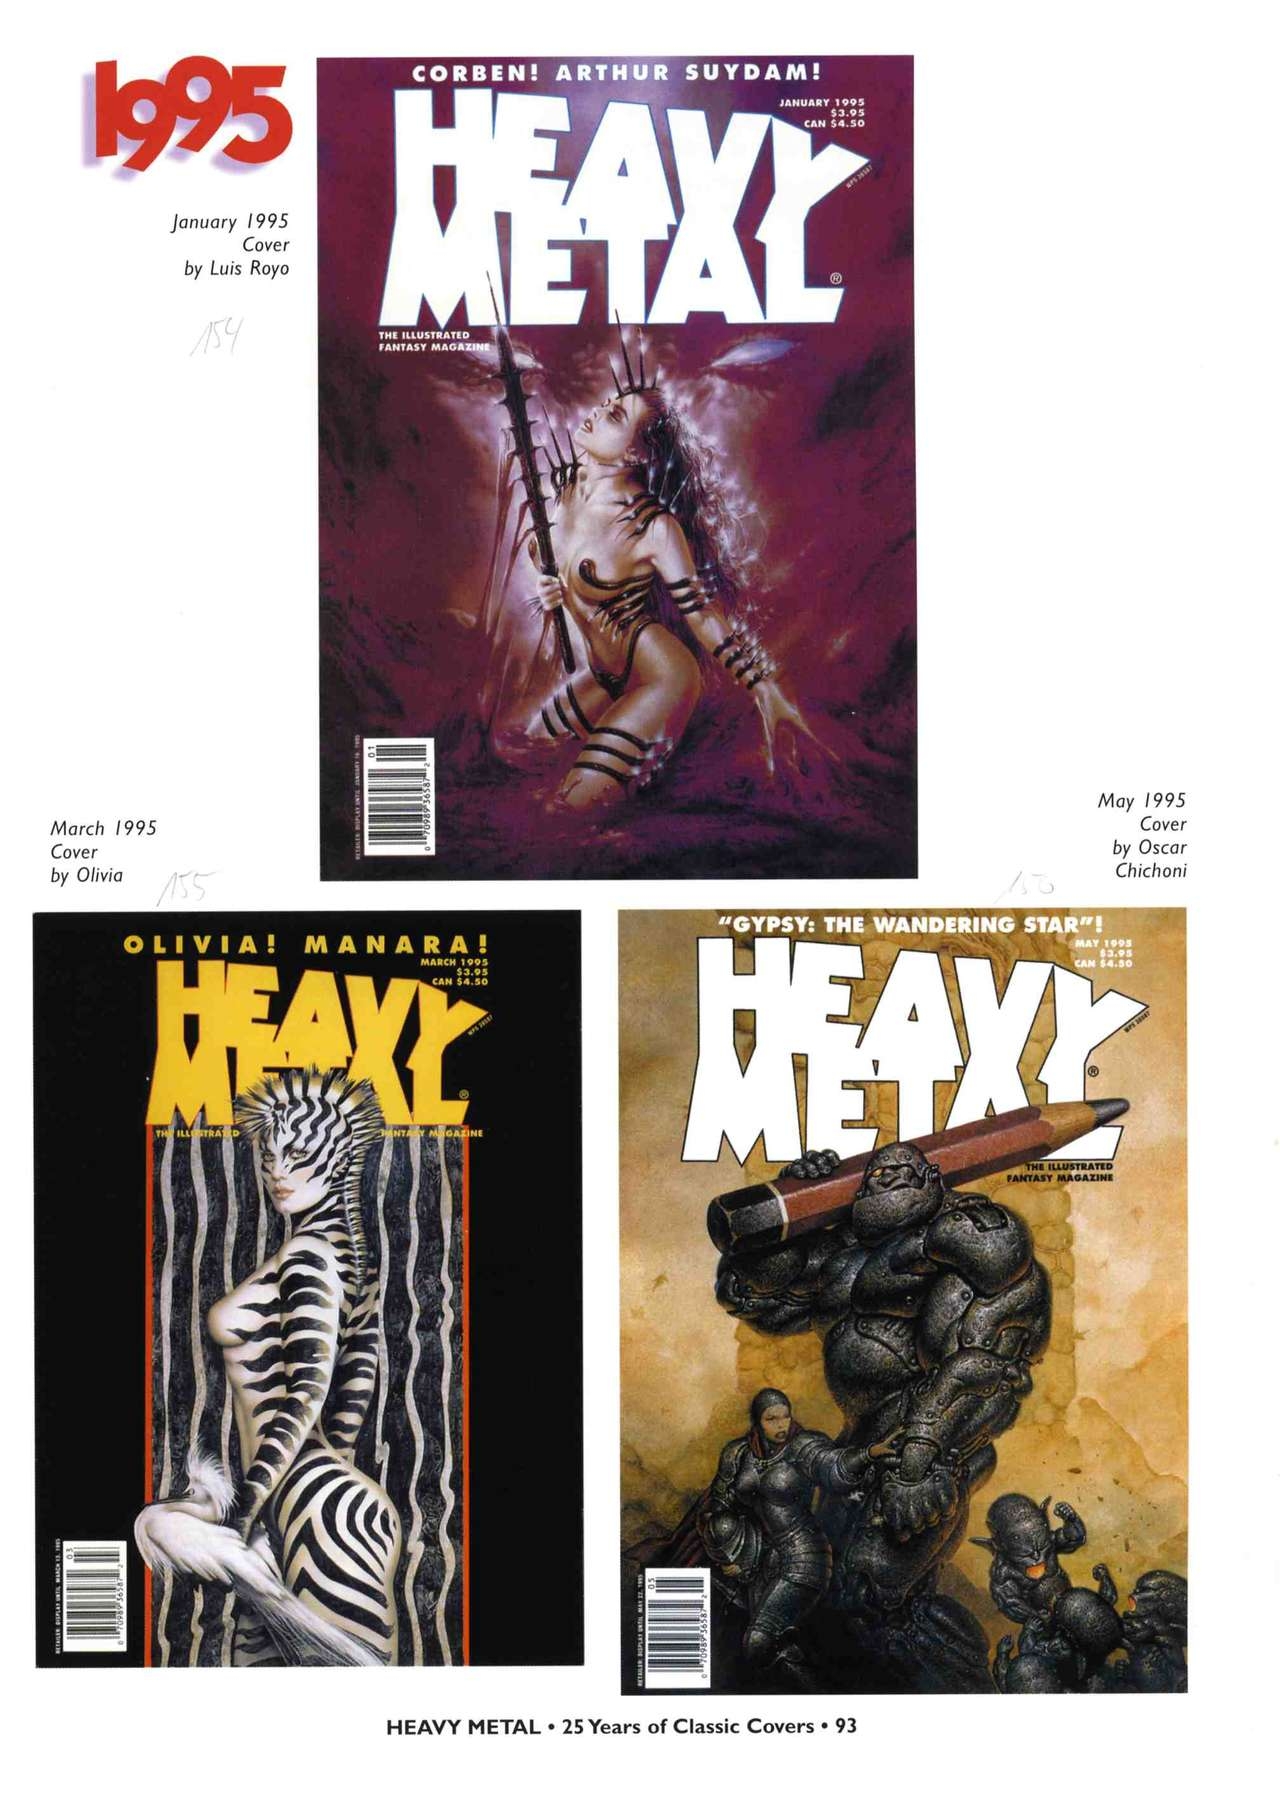 HEAVY METAL 25 Years of Classic Covers 98